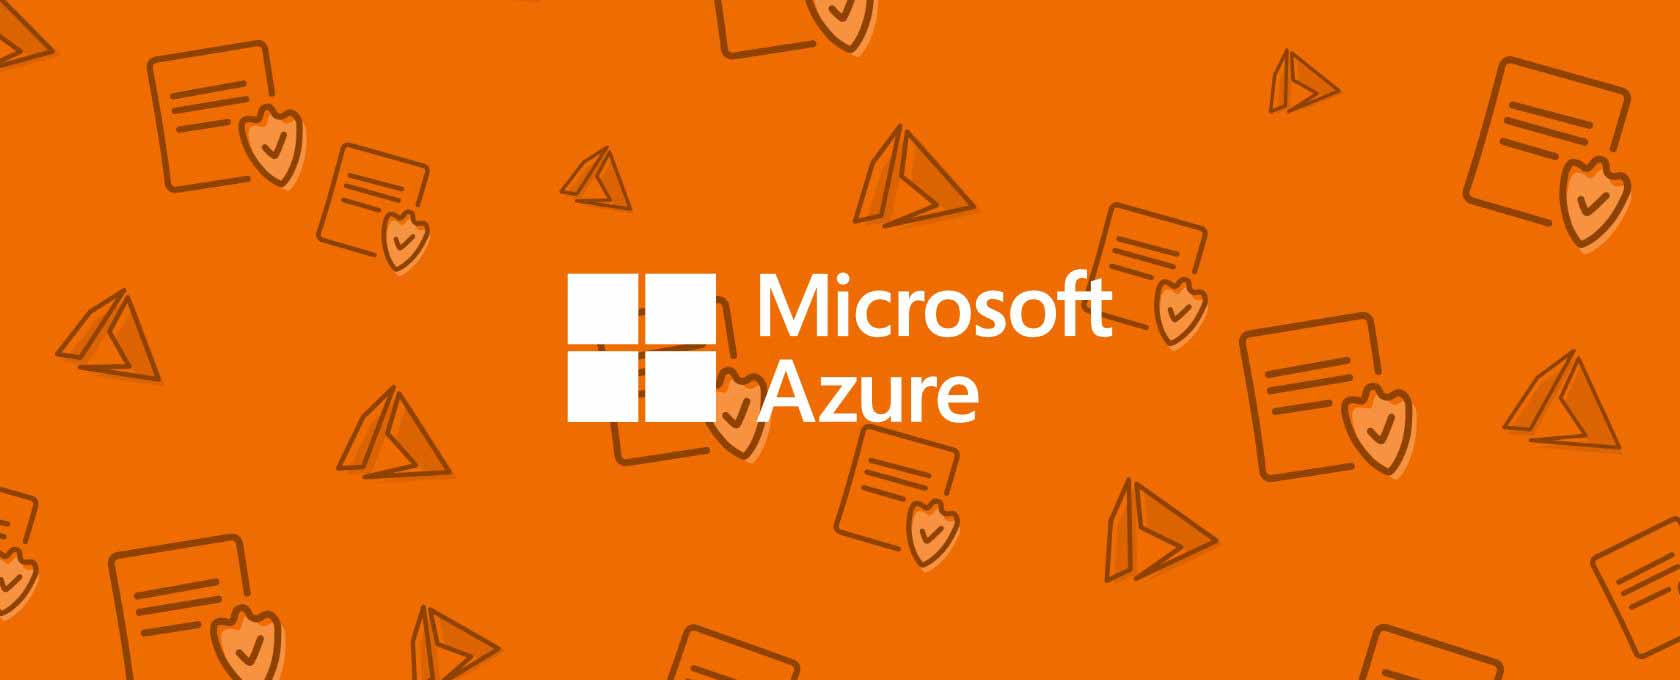 10 Key Azure Misconfigurations To Keep An Eye On